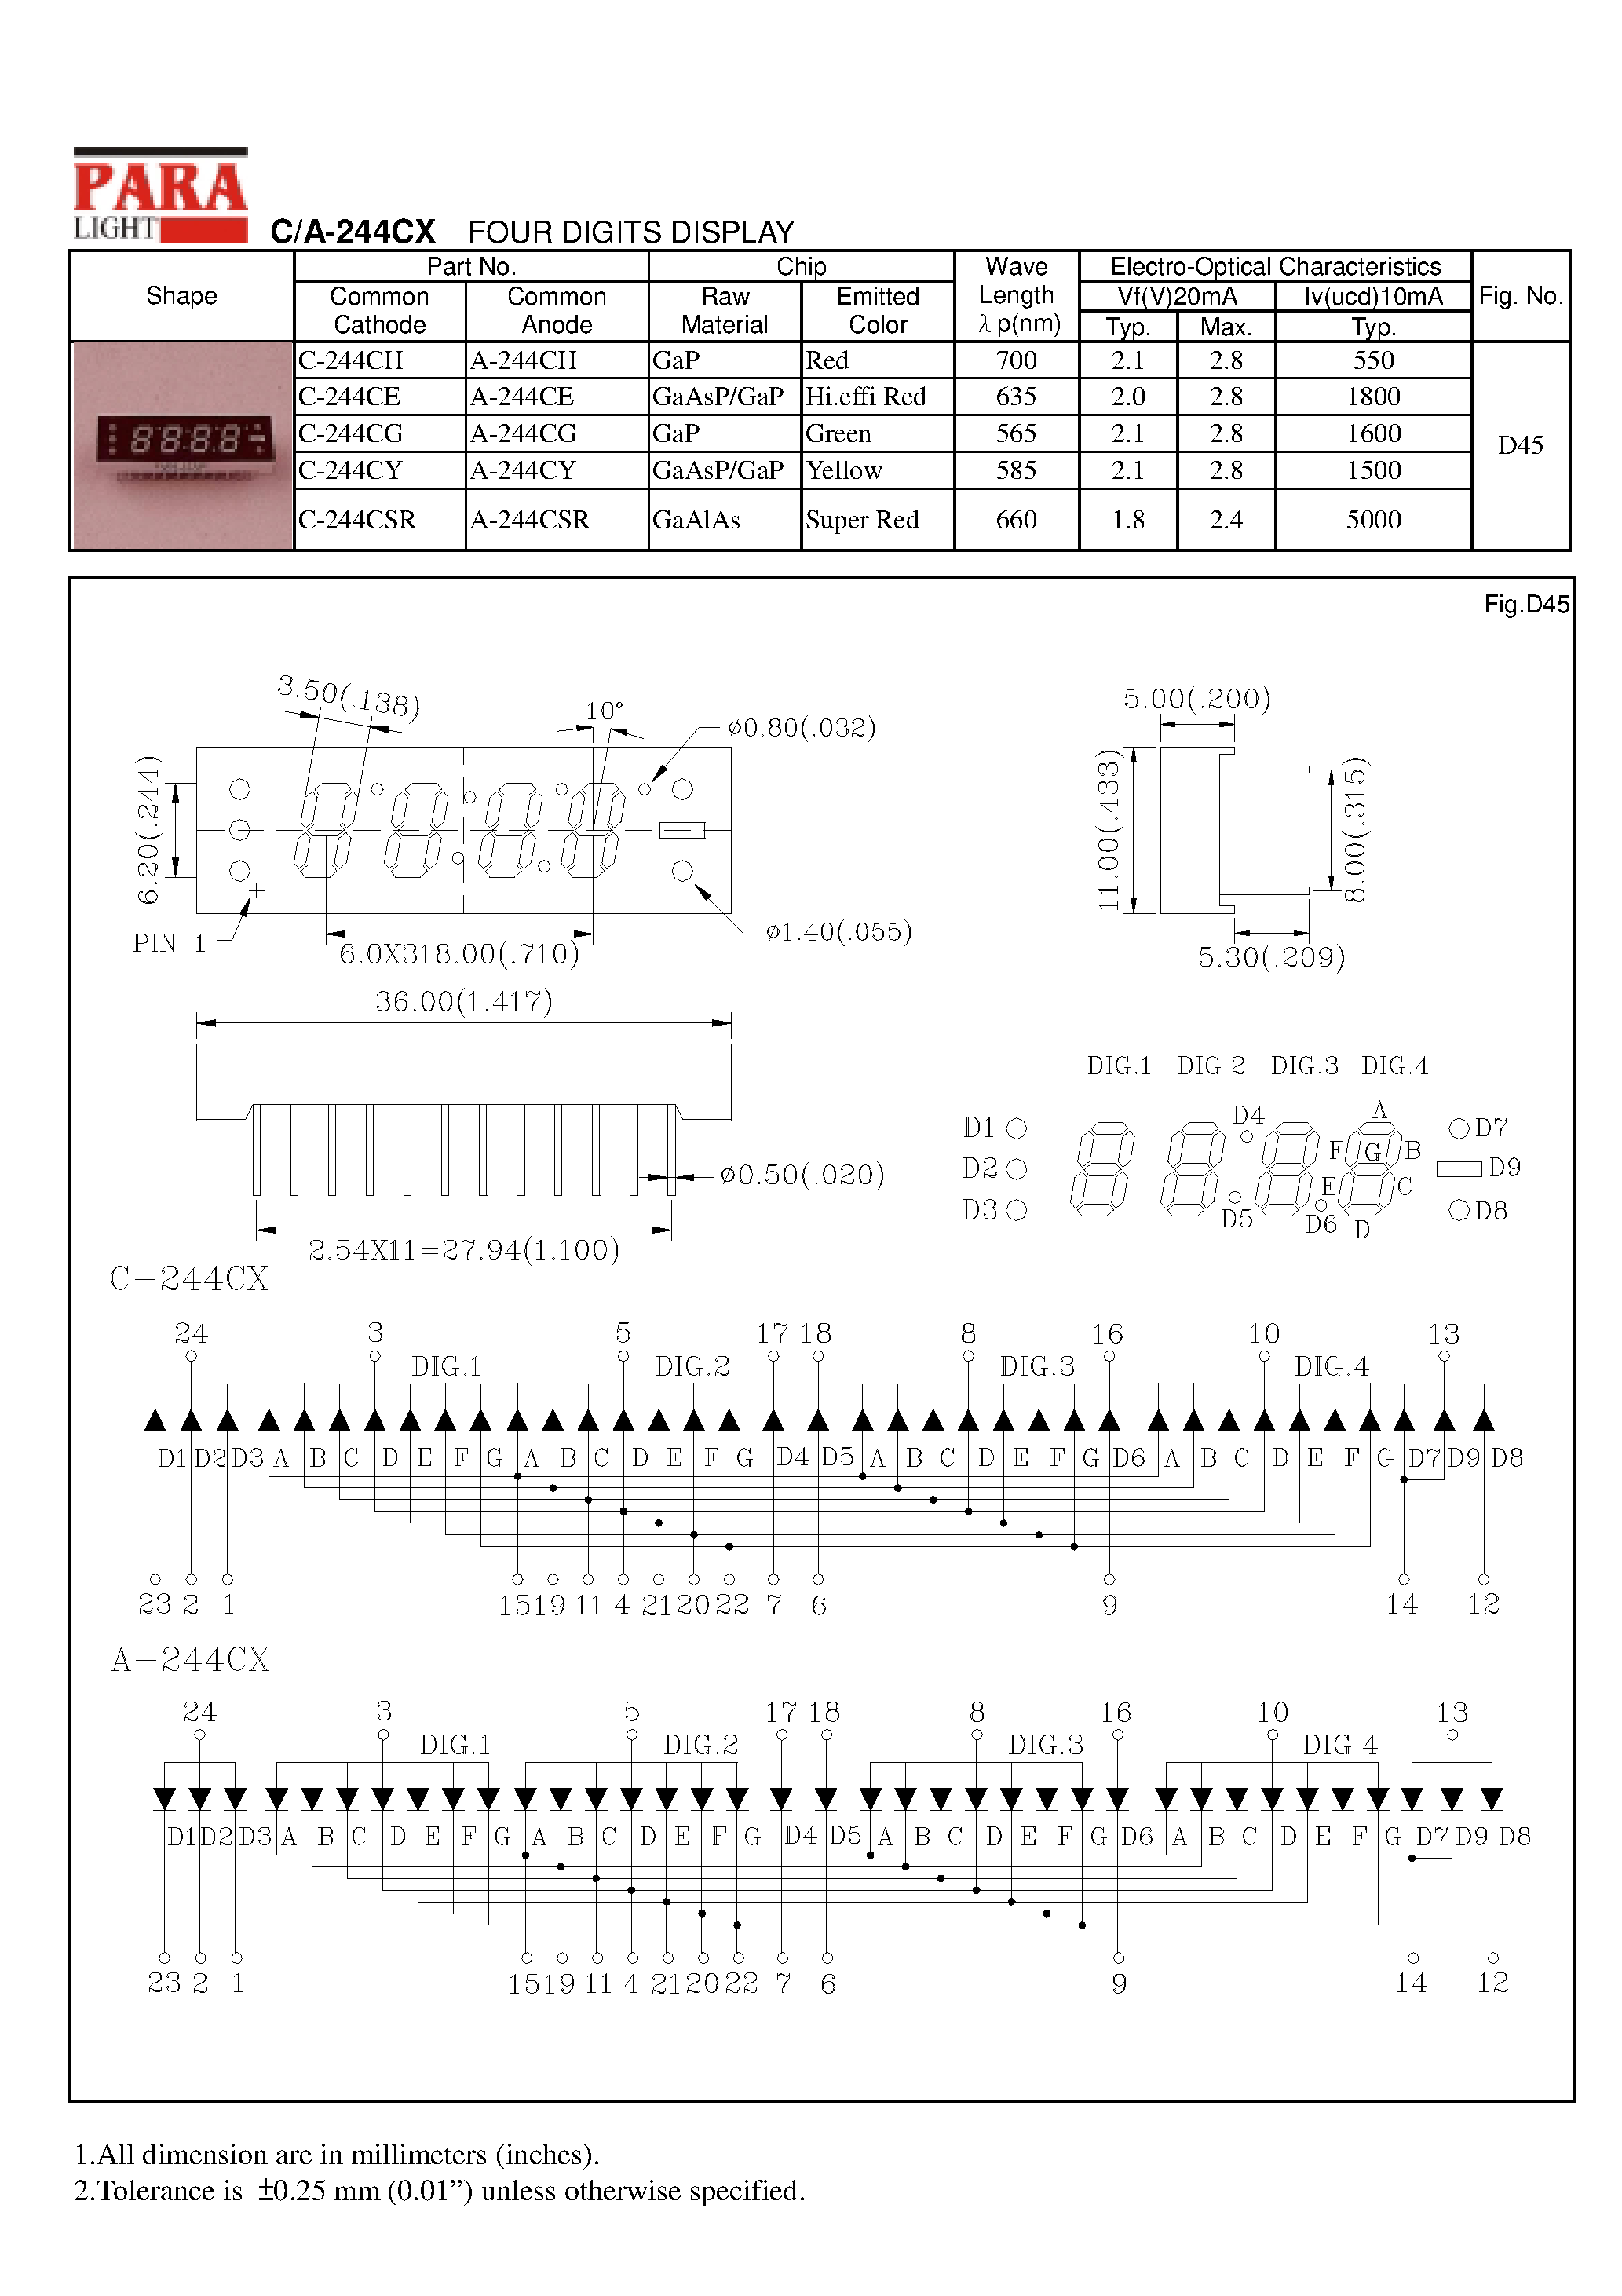 Datasheet A-244CE - FOUR DIGITS DISPLAY page 1